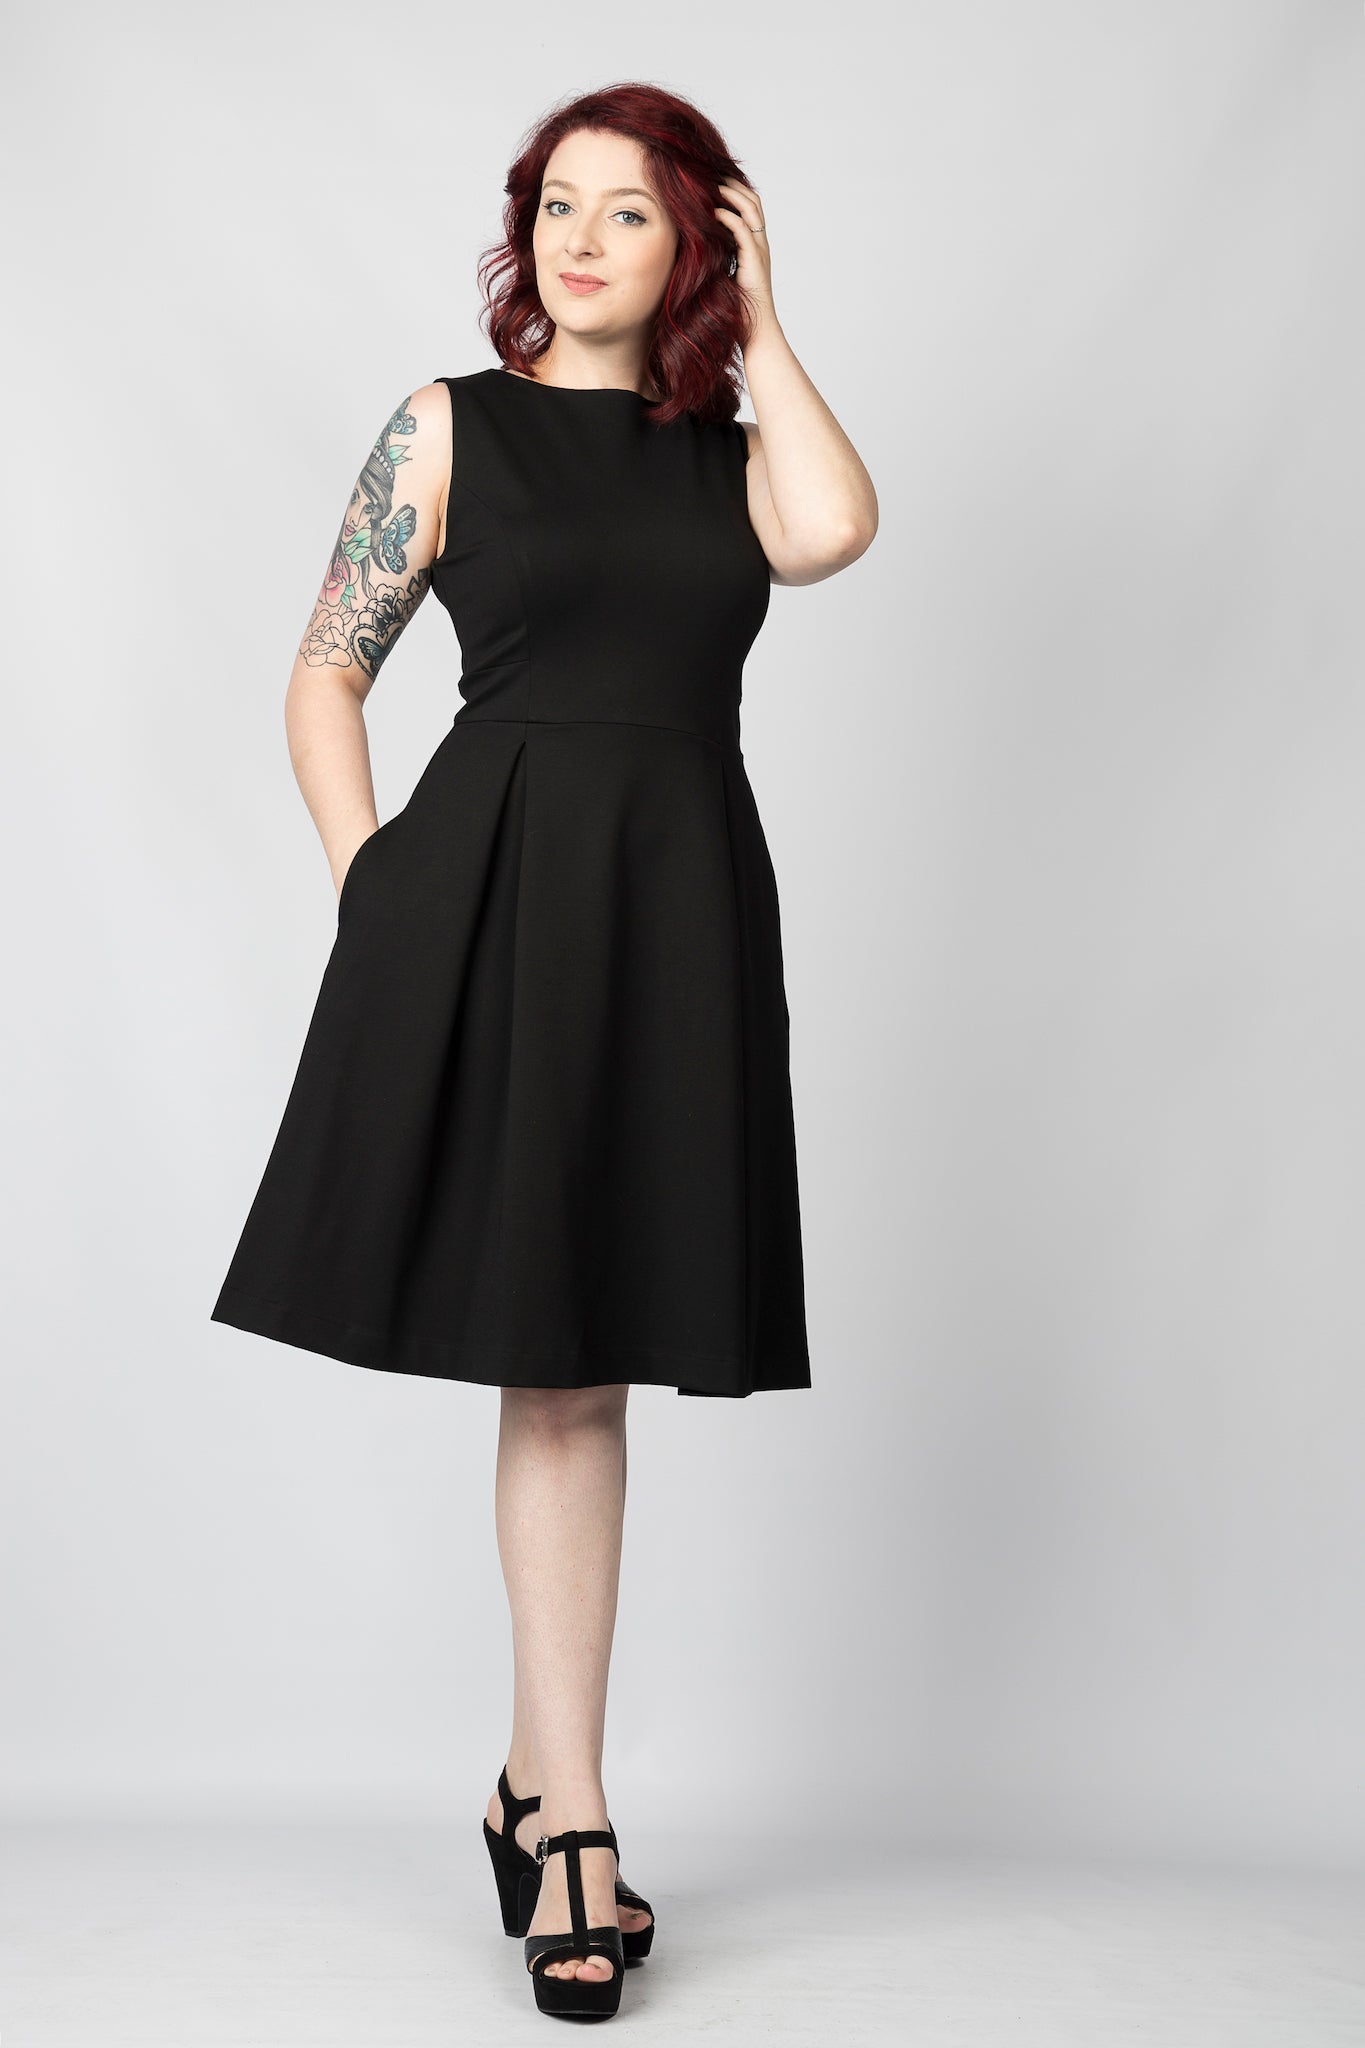 black fit and flare dress with pockets